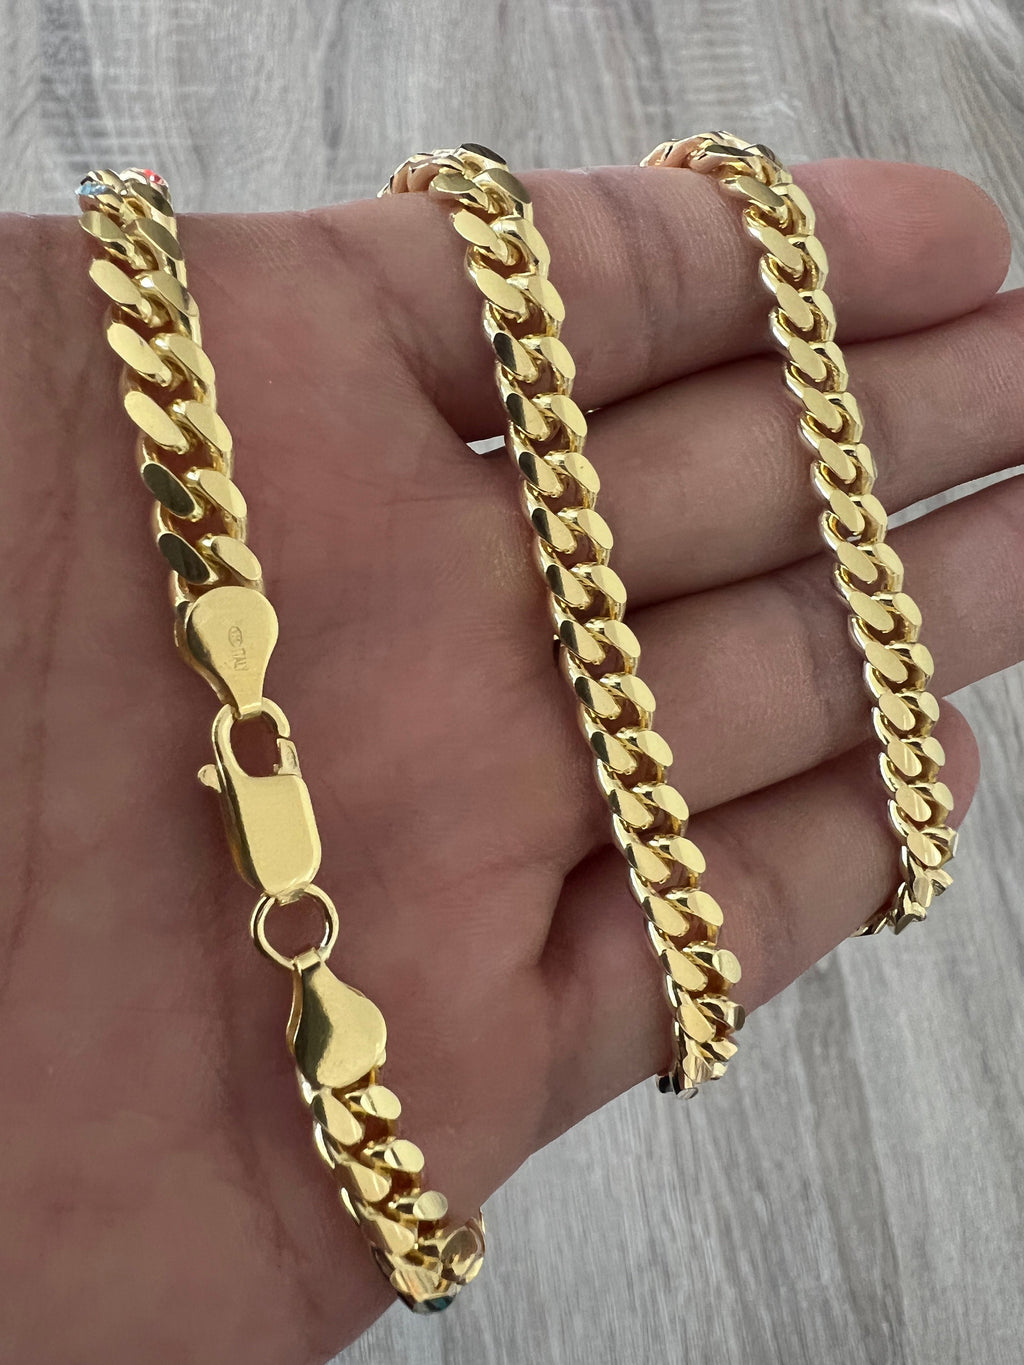 6mm Thick Men's Rope Chain 14k Gold Over Real Solid 925 Sterling